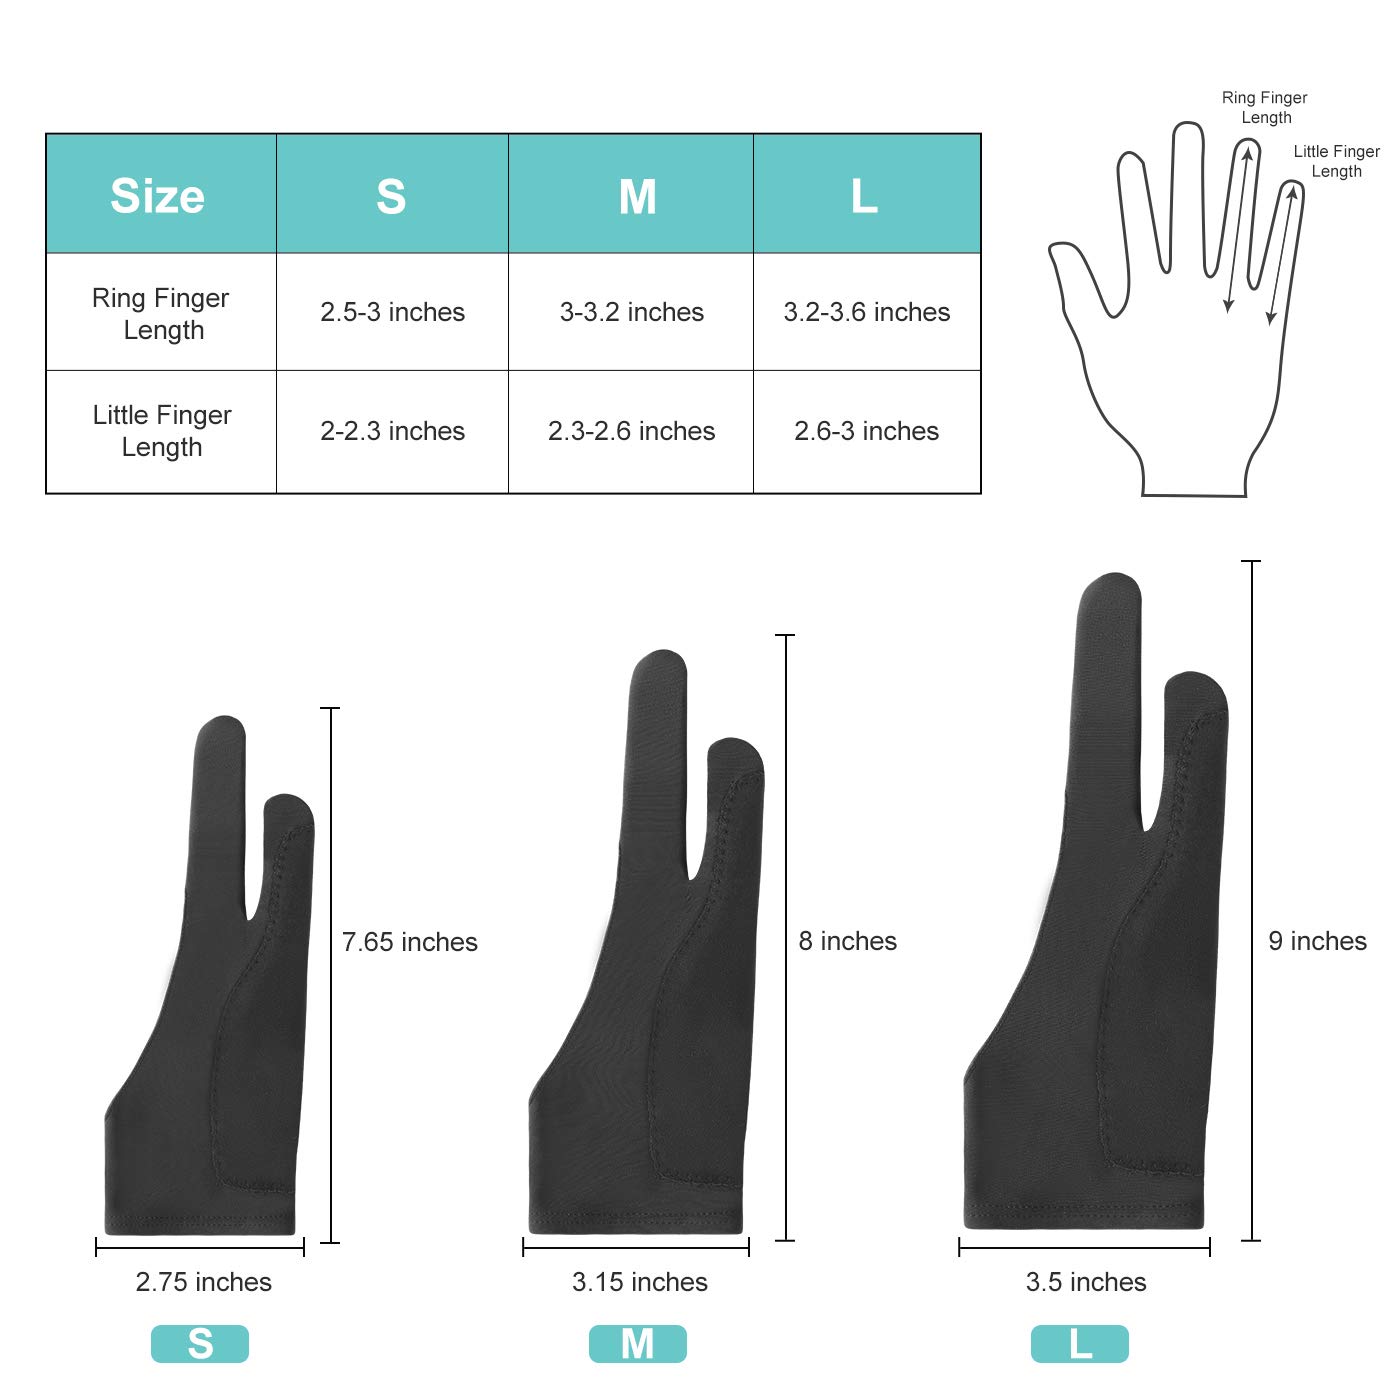 Mixoo Artists Gloves 2 Pack - Palm Rejection Gloves with Two Fingers for Paper Sketching, iPad, Graphics Drawing Tablet, Suitable for Left and Right Hand (Medium)